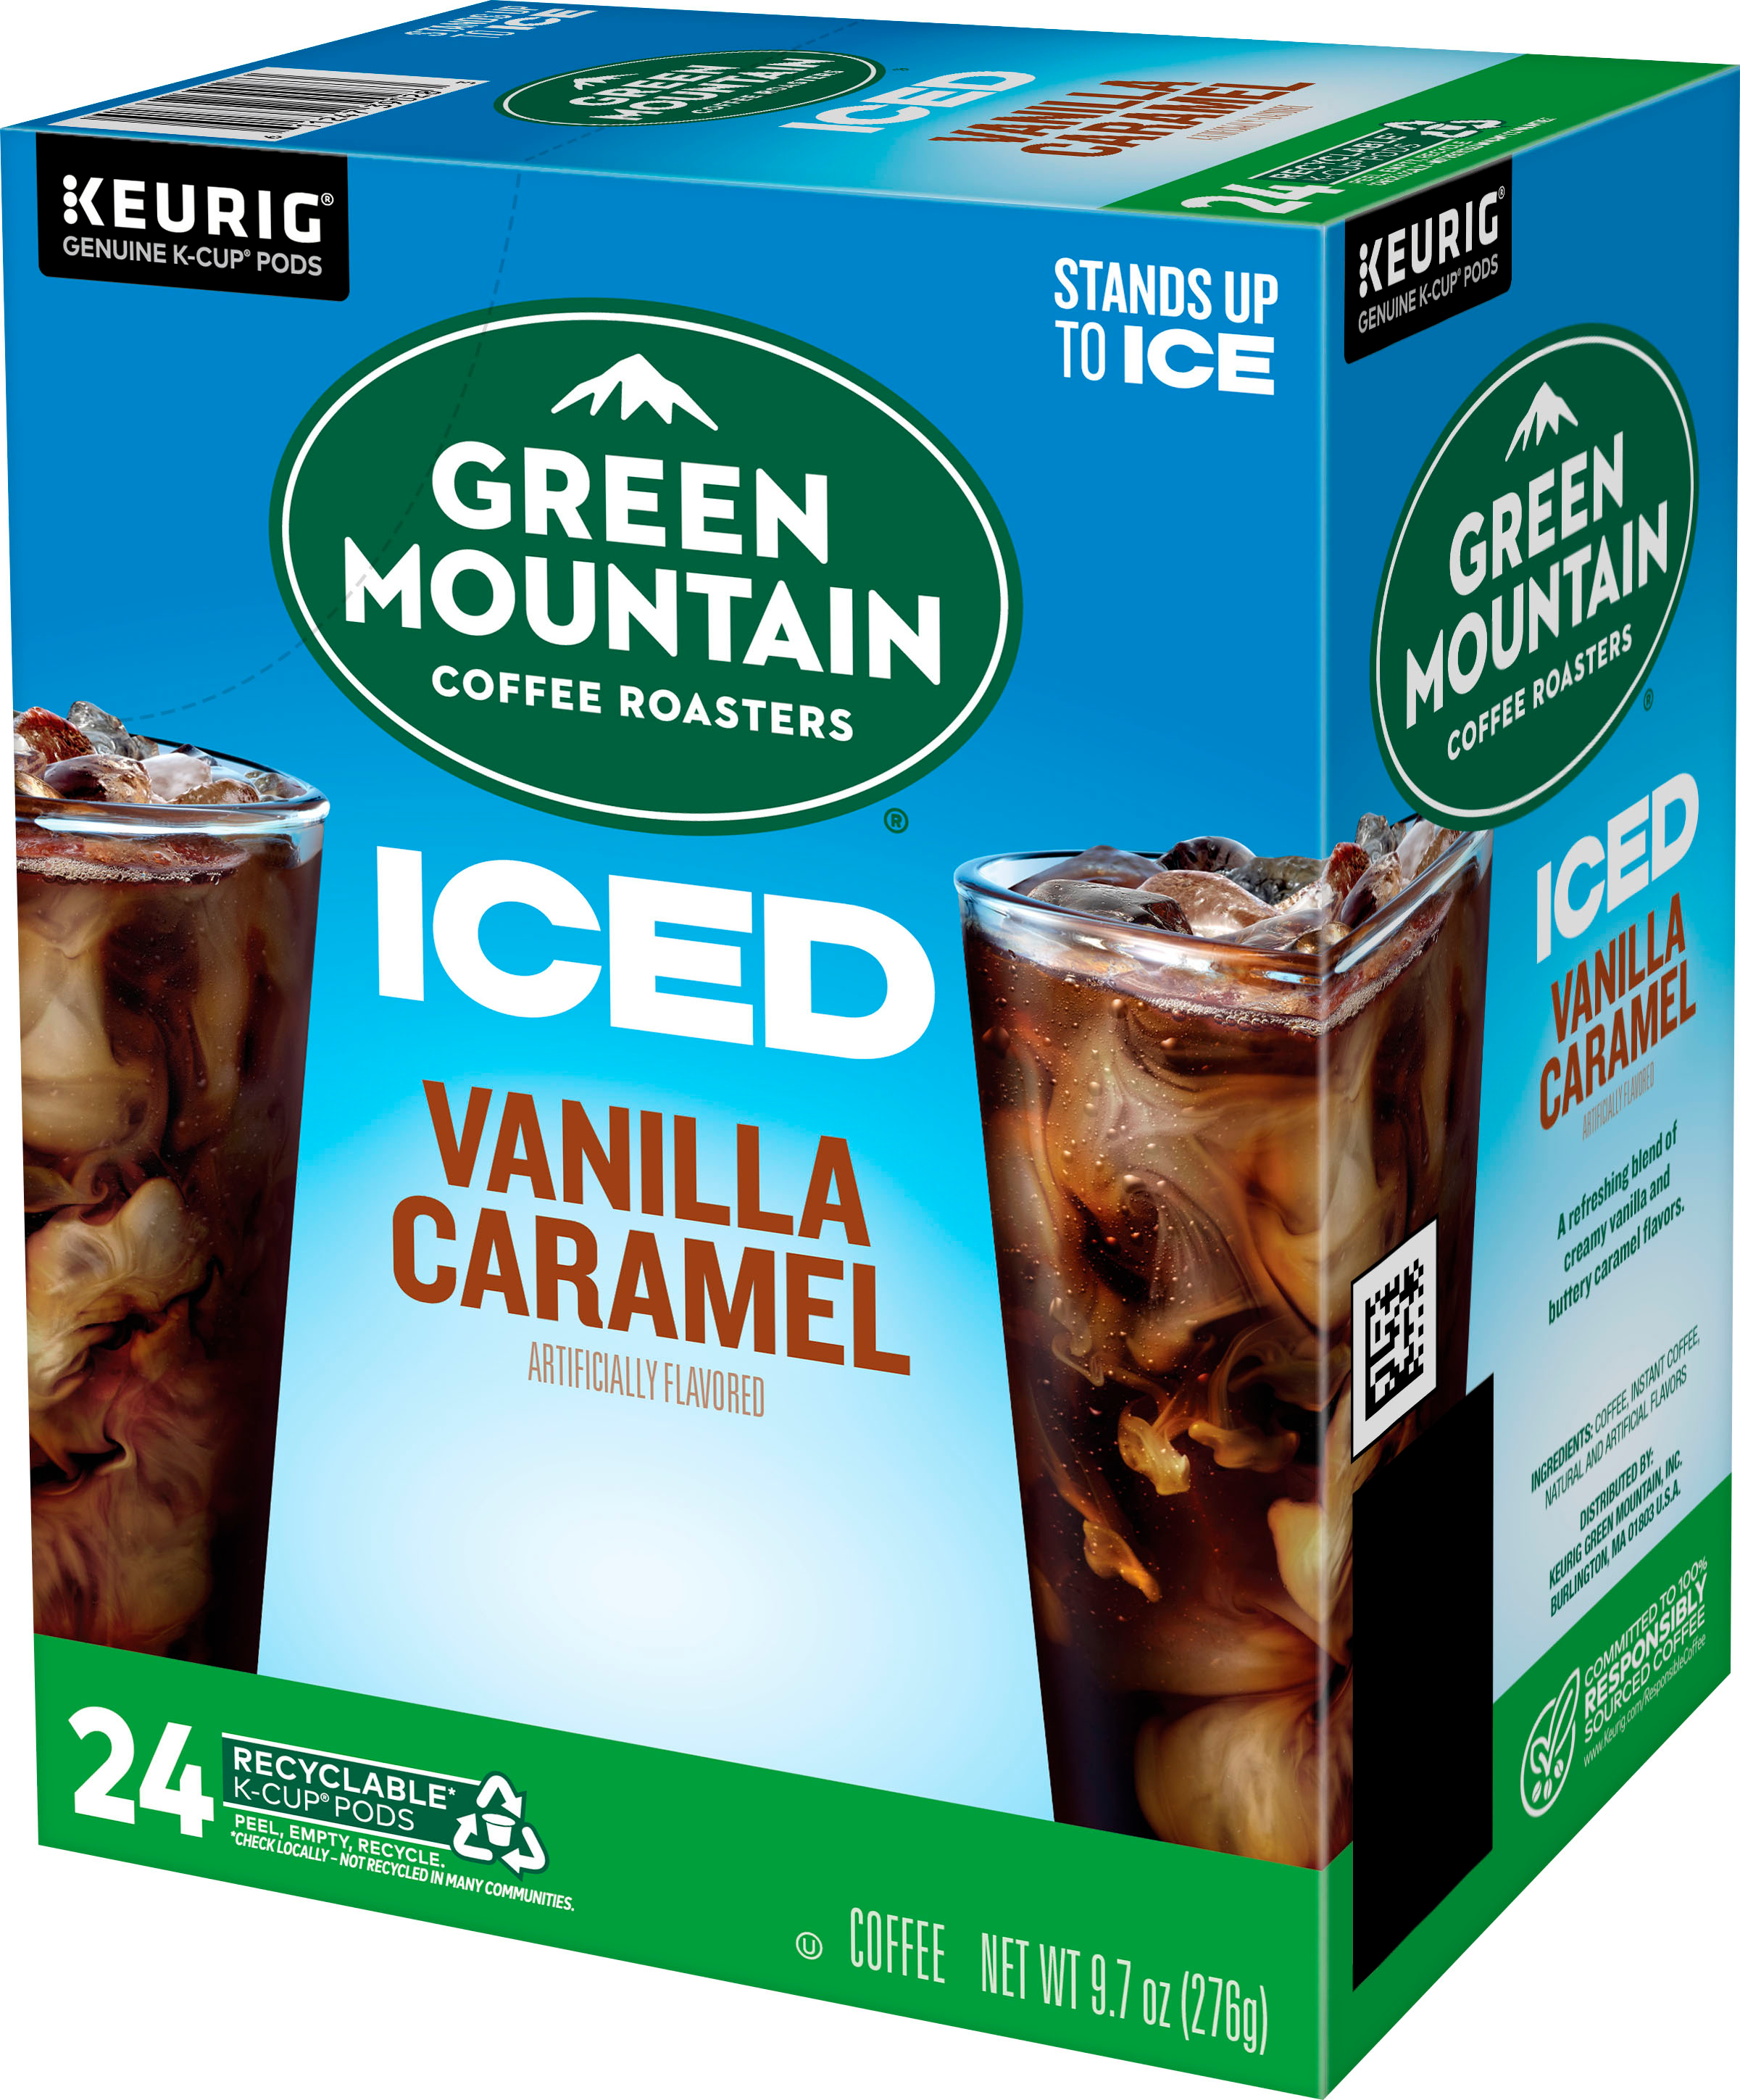 Green Mountain Coffee Roasters Brew Over Ice Vanilla Caramel, Single Serve Keurig  K-Cup Pods, Flavored Iced Coffee, 12 Count